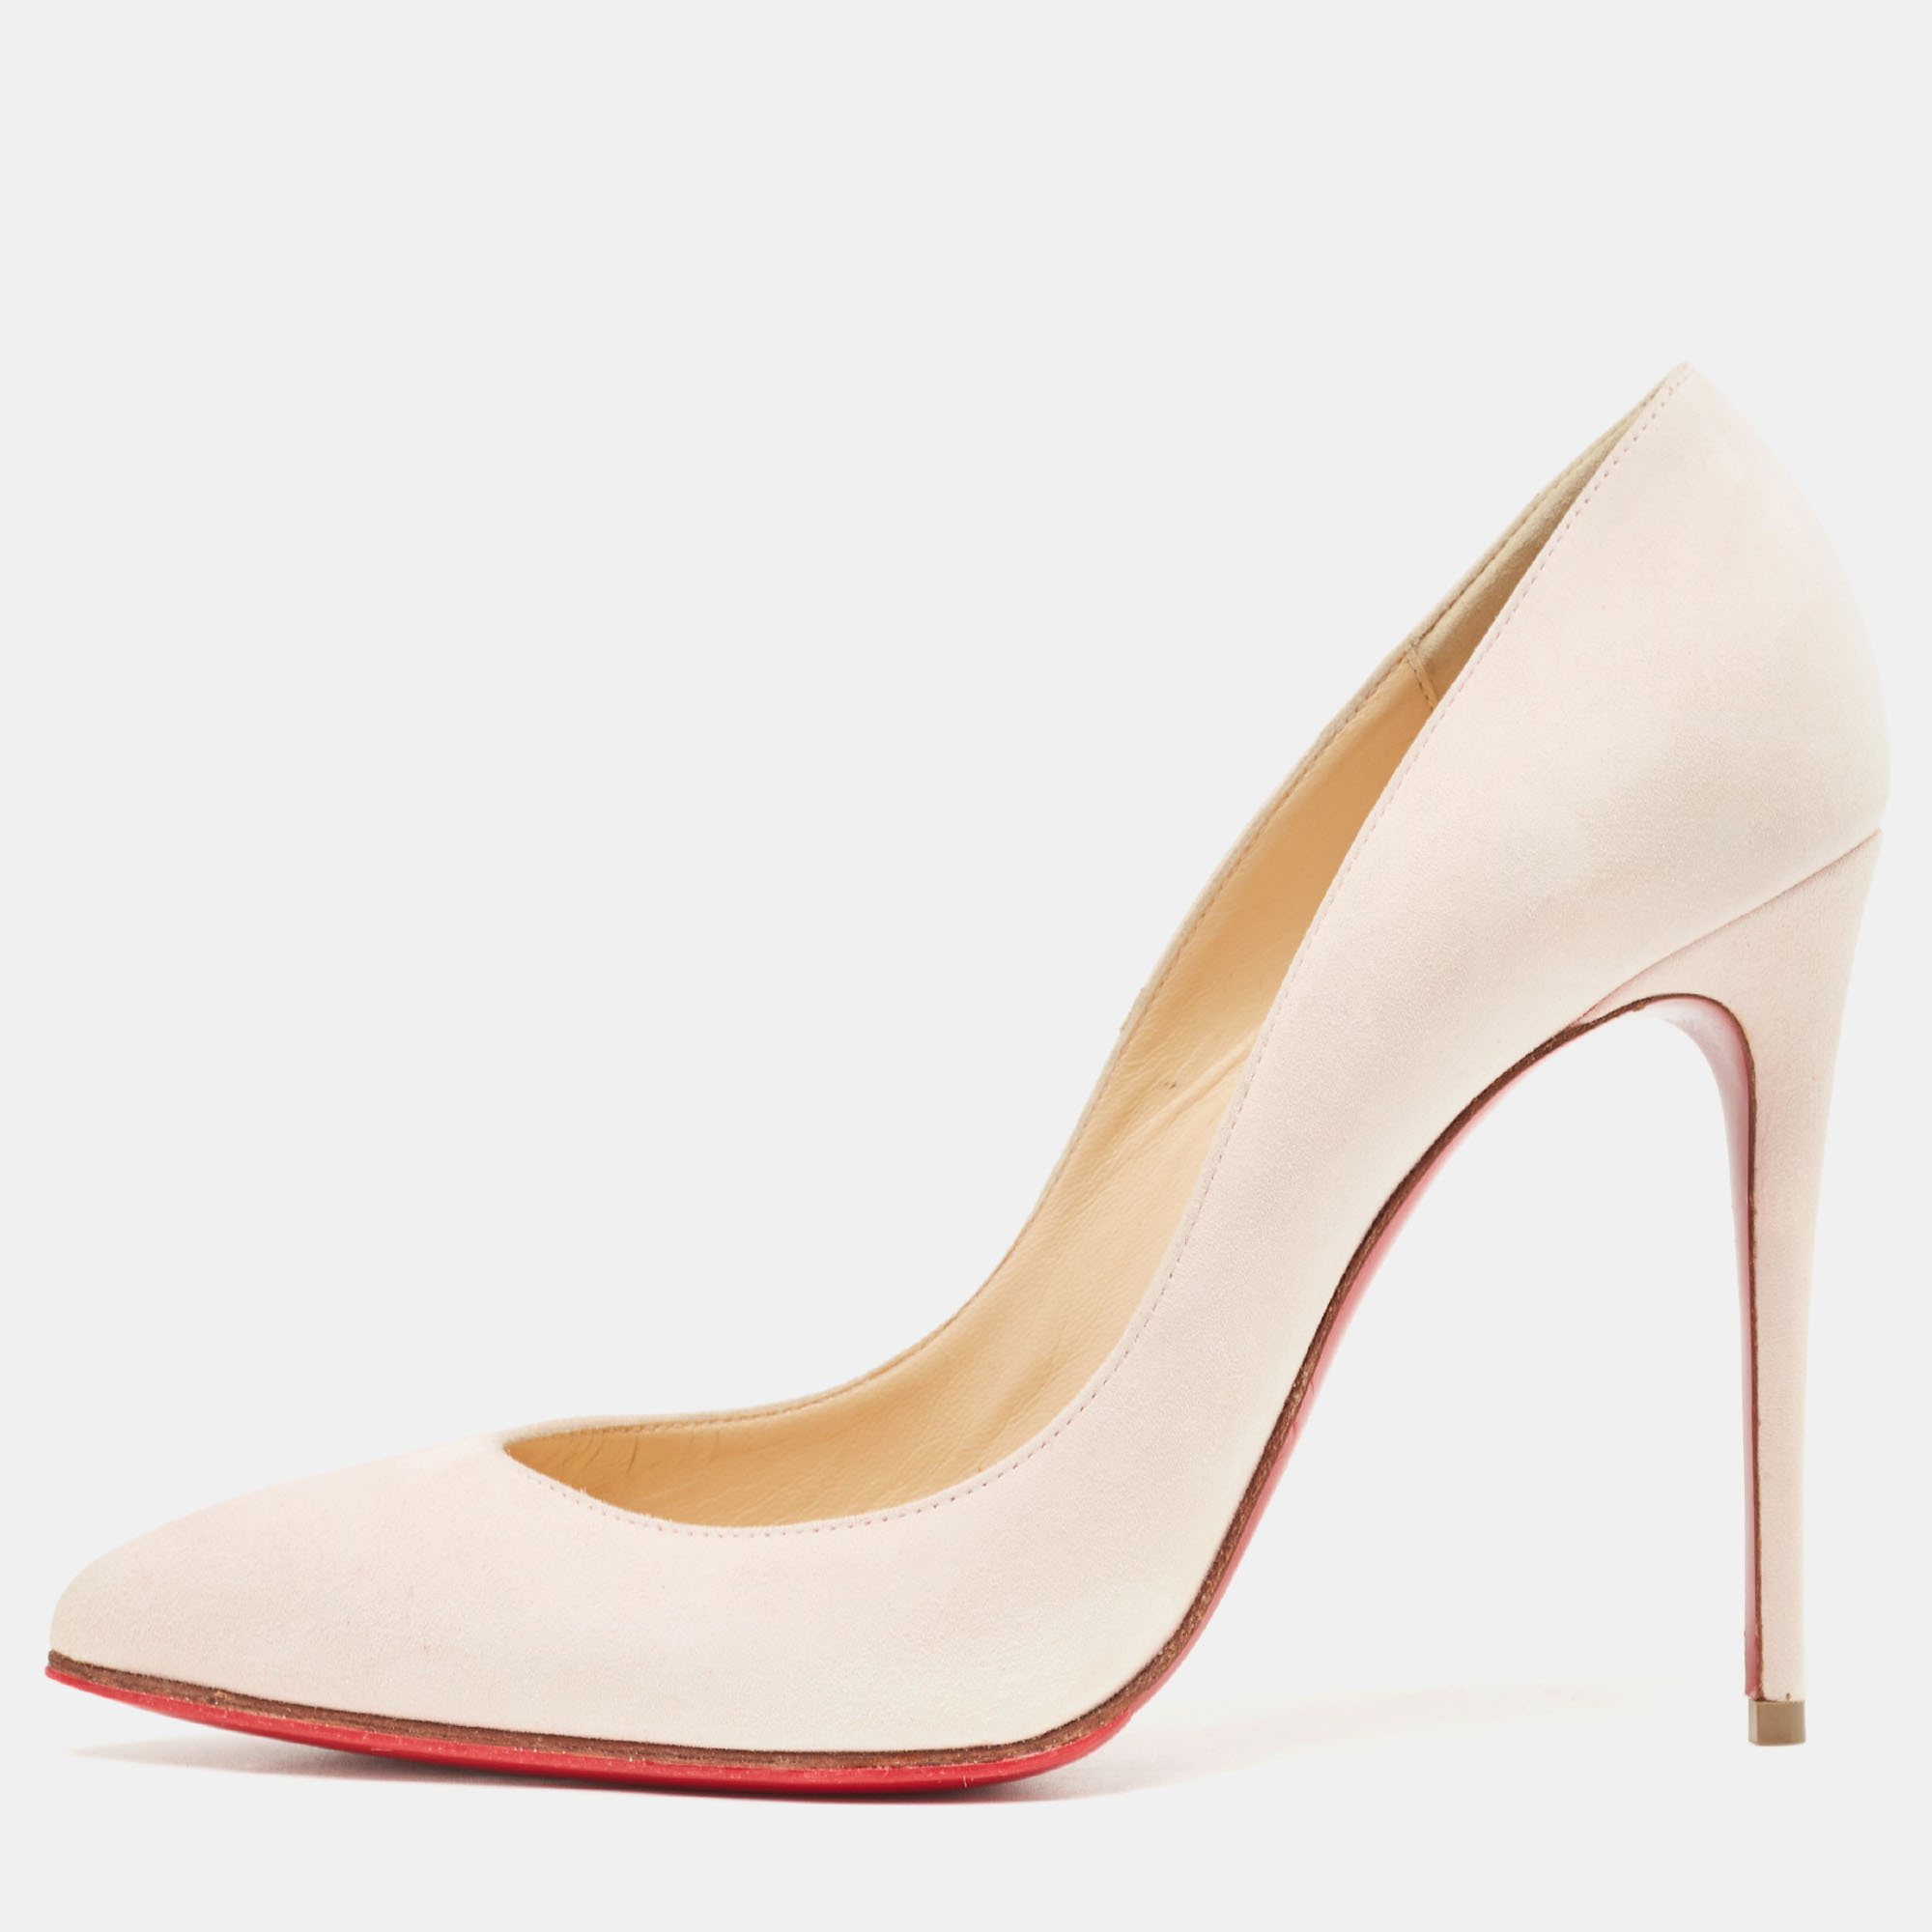 Pre-owned Christian Louboutin Light Pink Suede Pigalle Follies Pumps Size 38